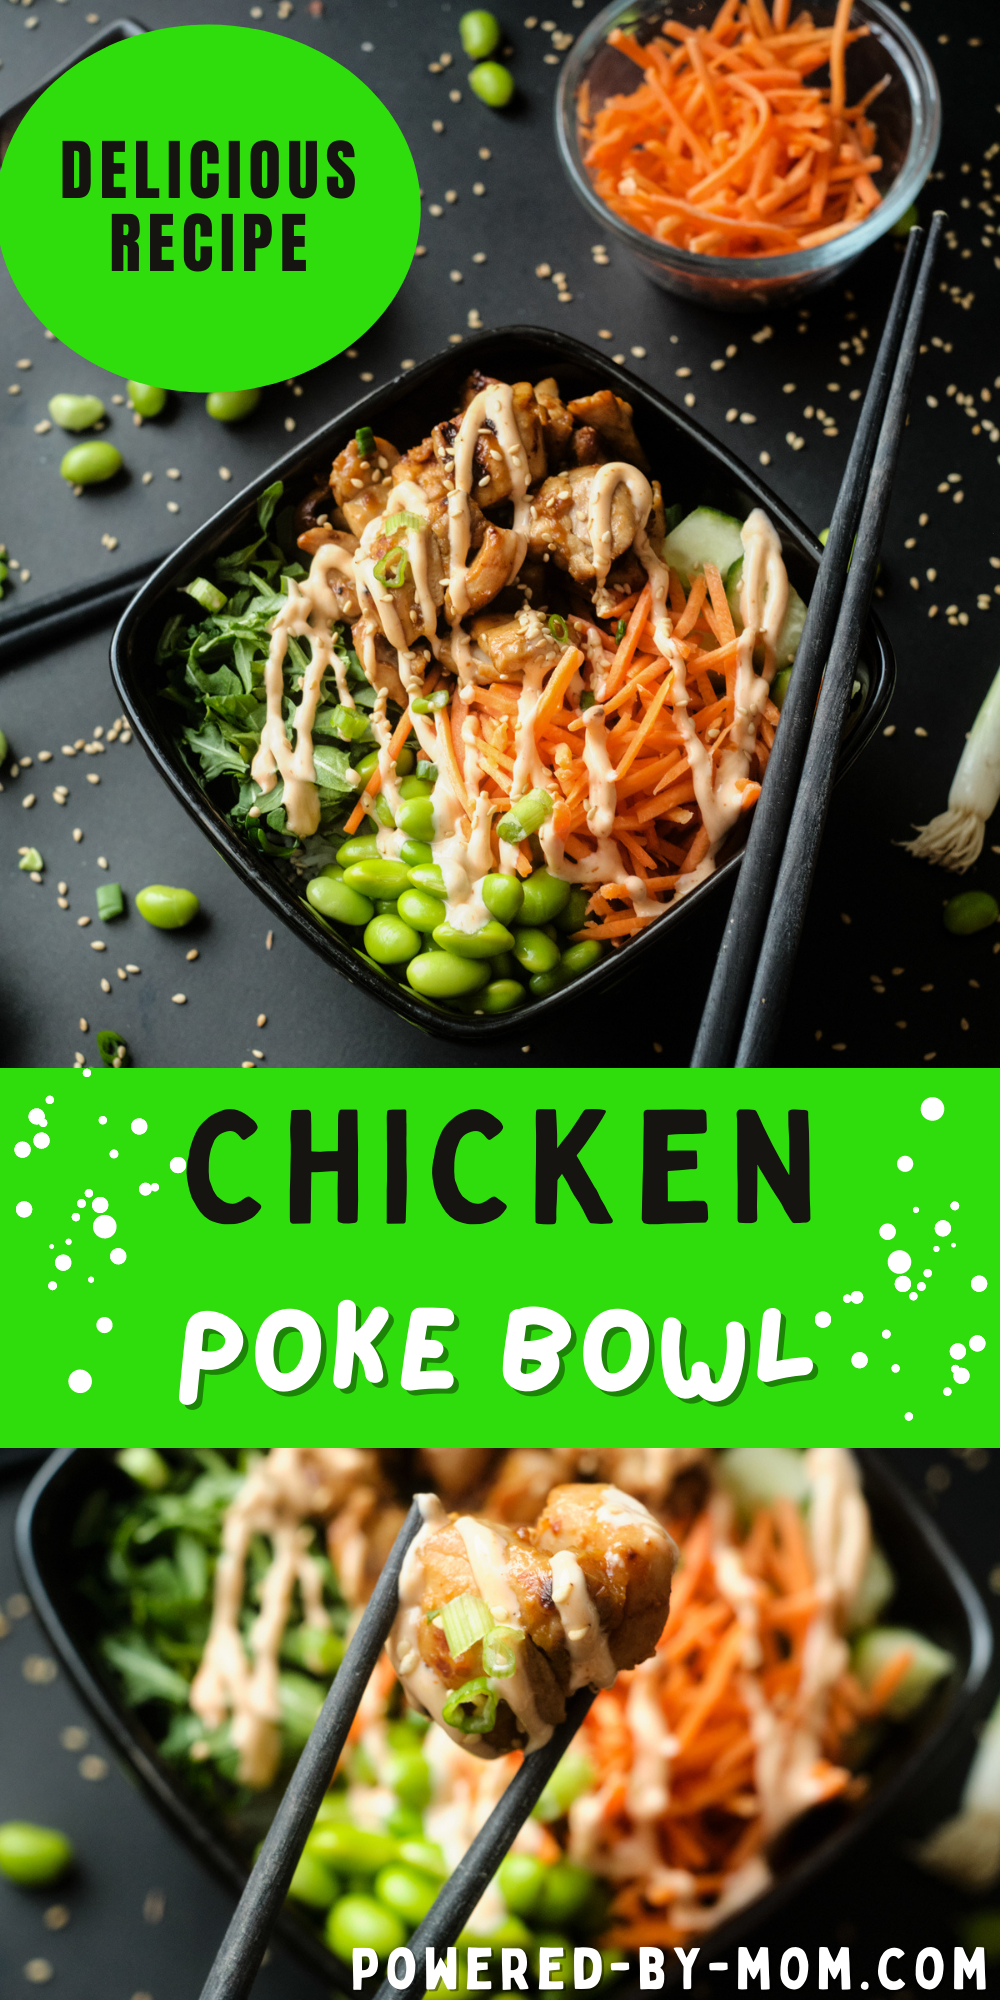 This delicious and healthy Chicken Poke Bowl Recipe is full of flavour, is easy to make and is finished with a yummy sriracha mayo.